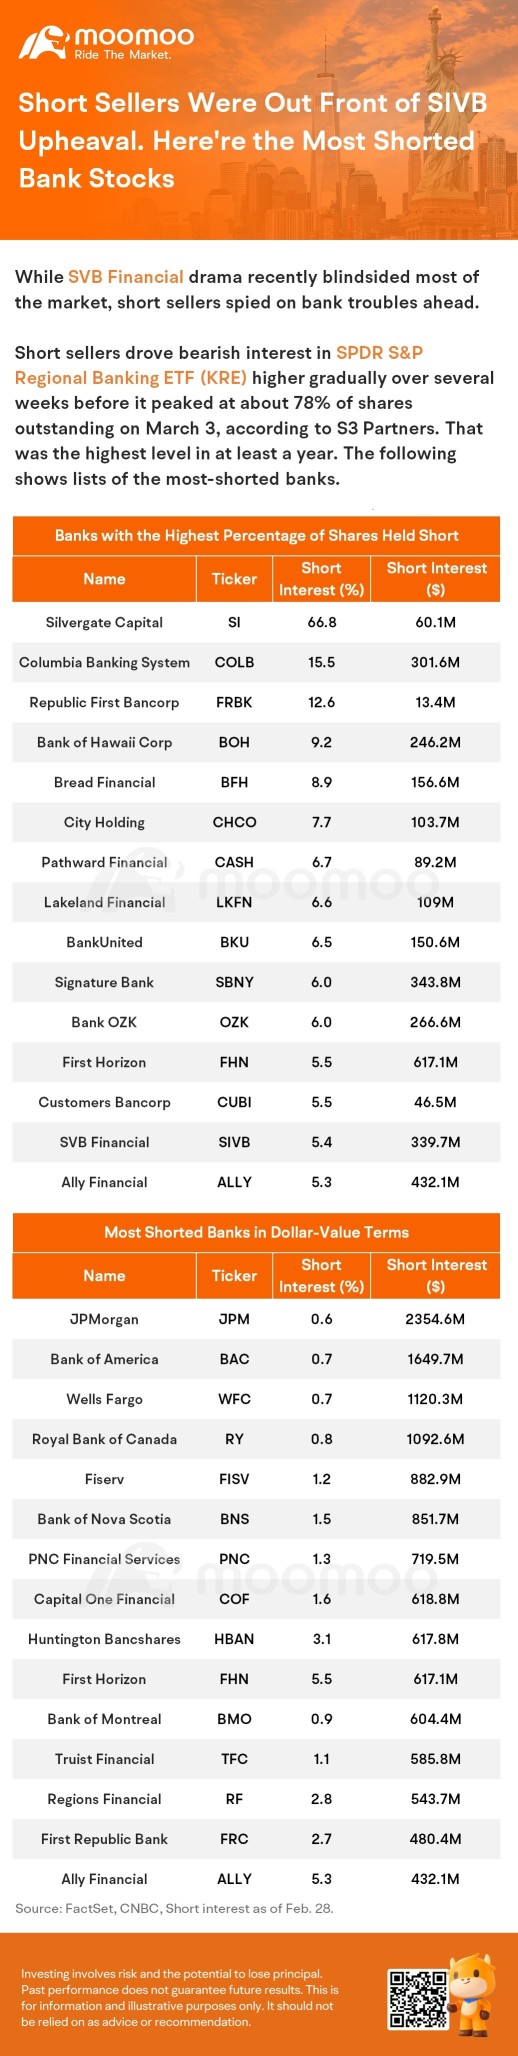 Short Sellers Were Out Front of SIVB Upheaval. Here're the Most Shorted Bank Stocks